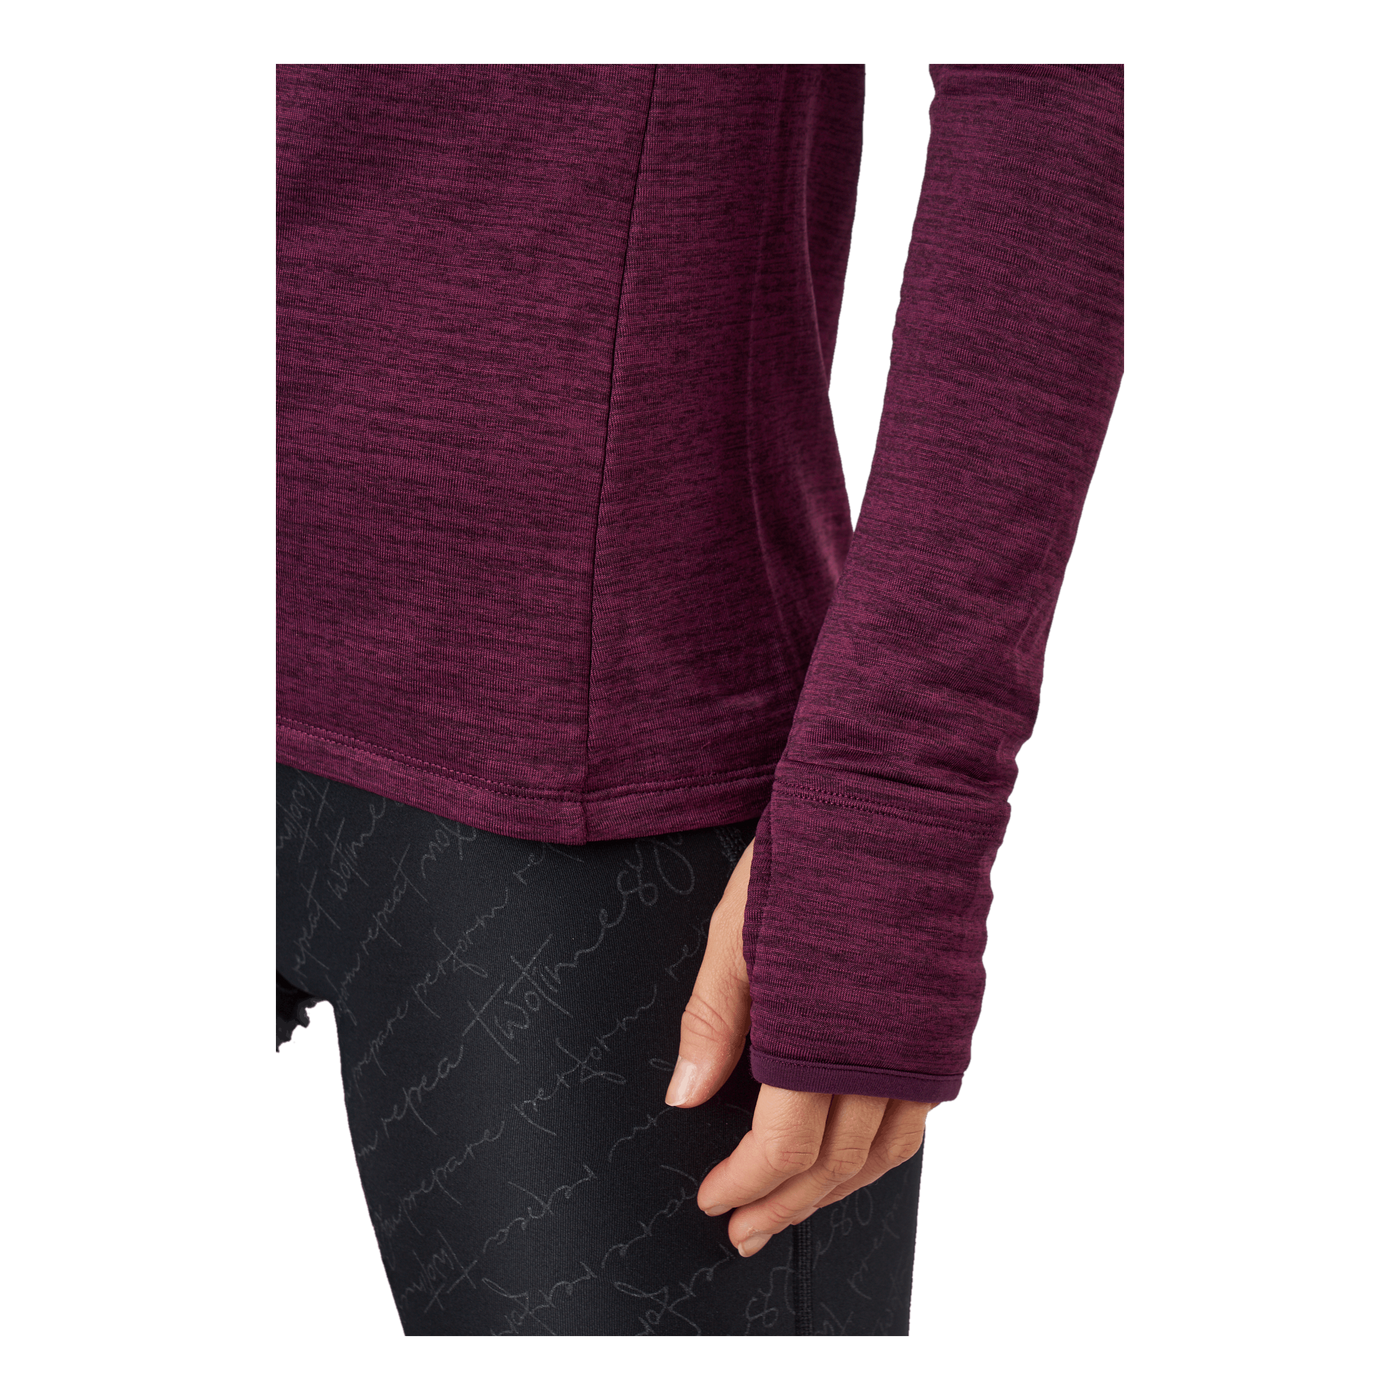 Ignition 1/4 Zip Beet/silver Reflective